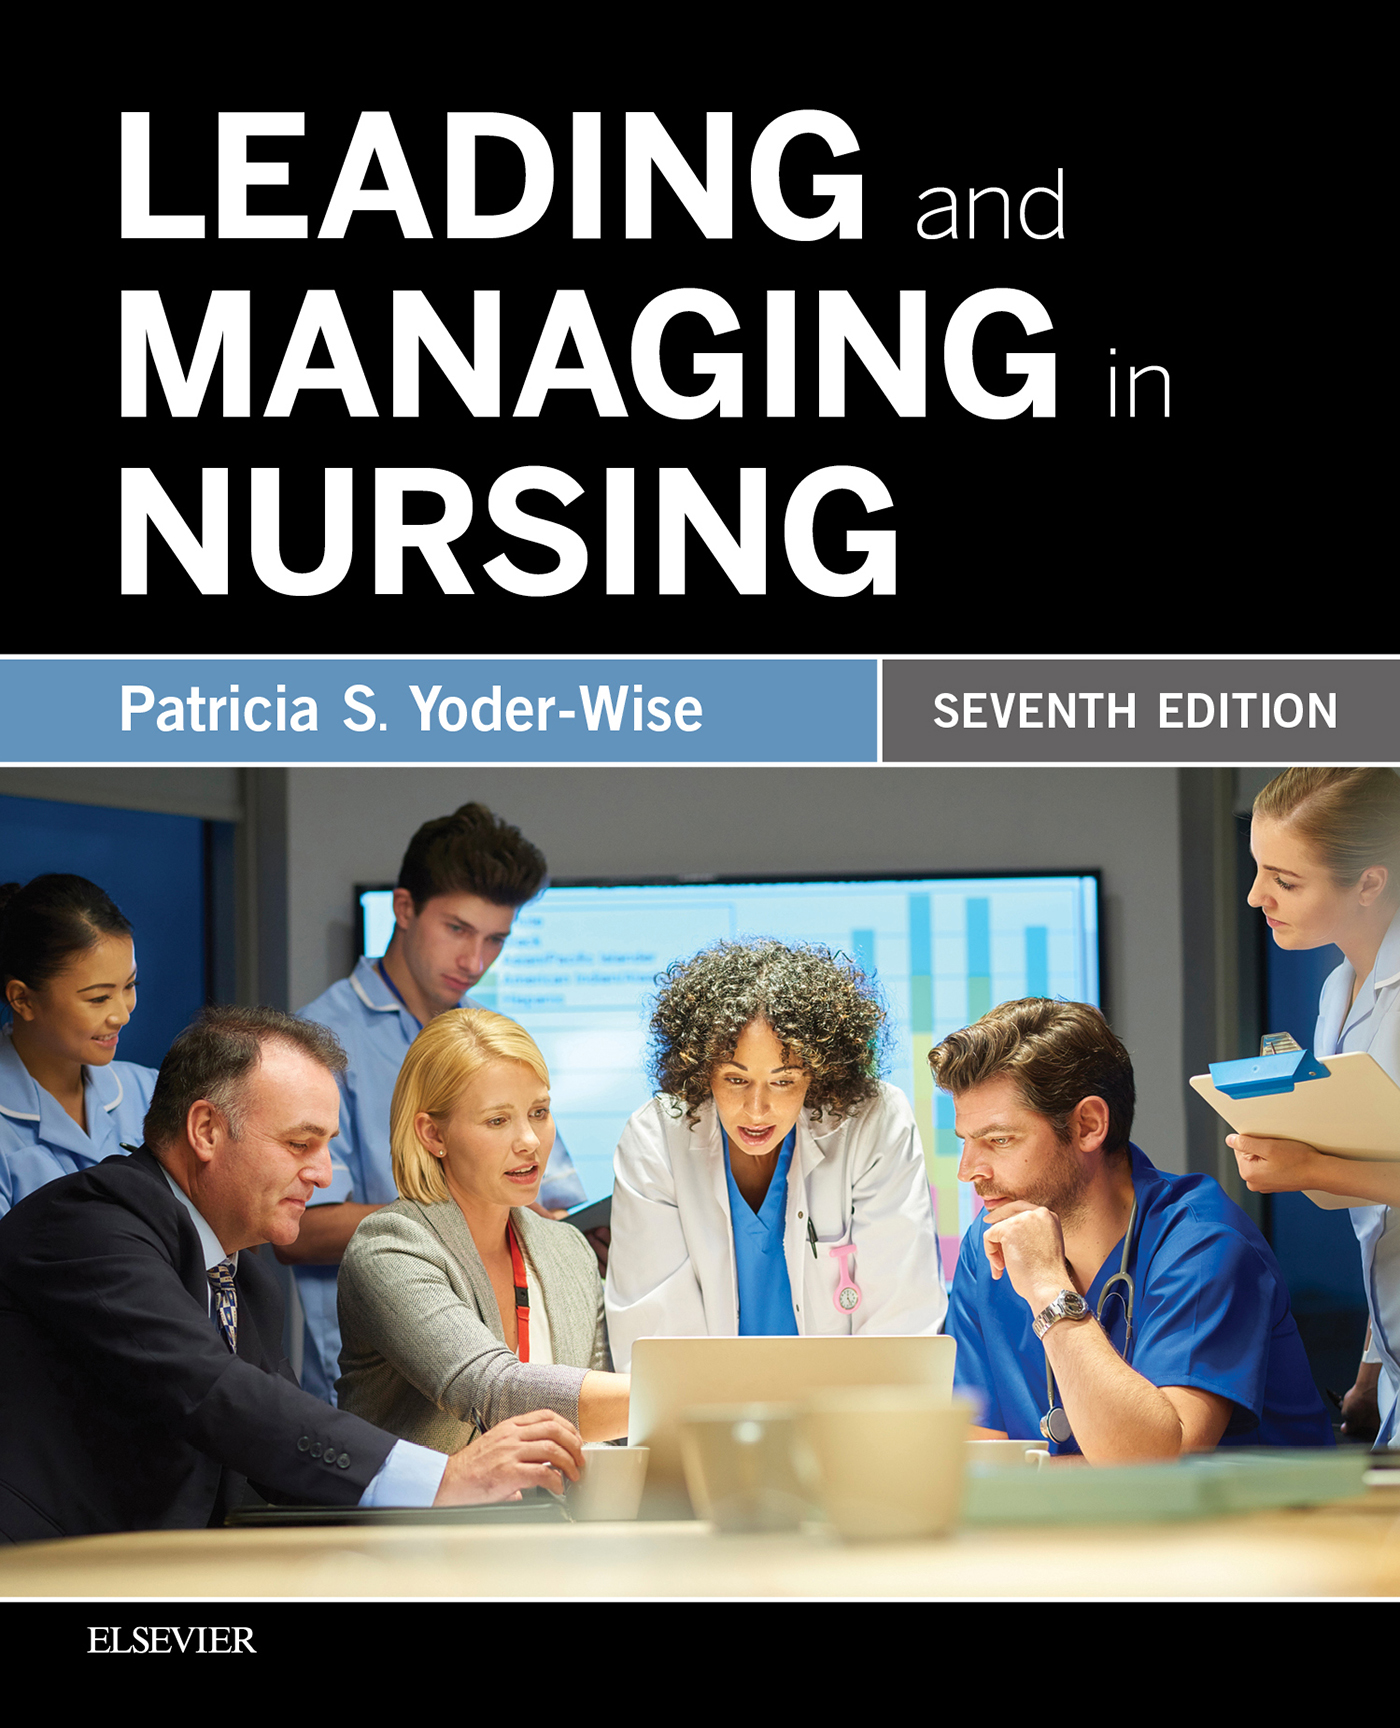 Leading and Managing in Nursing EBook 7th Edition RedShelf